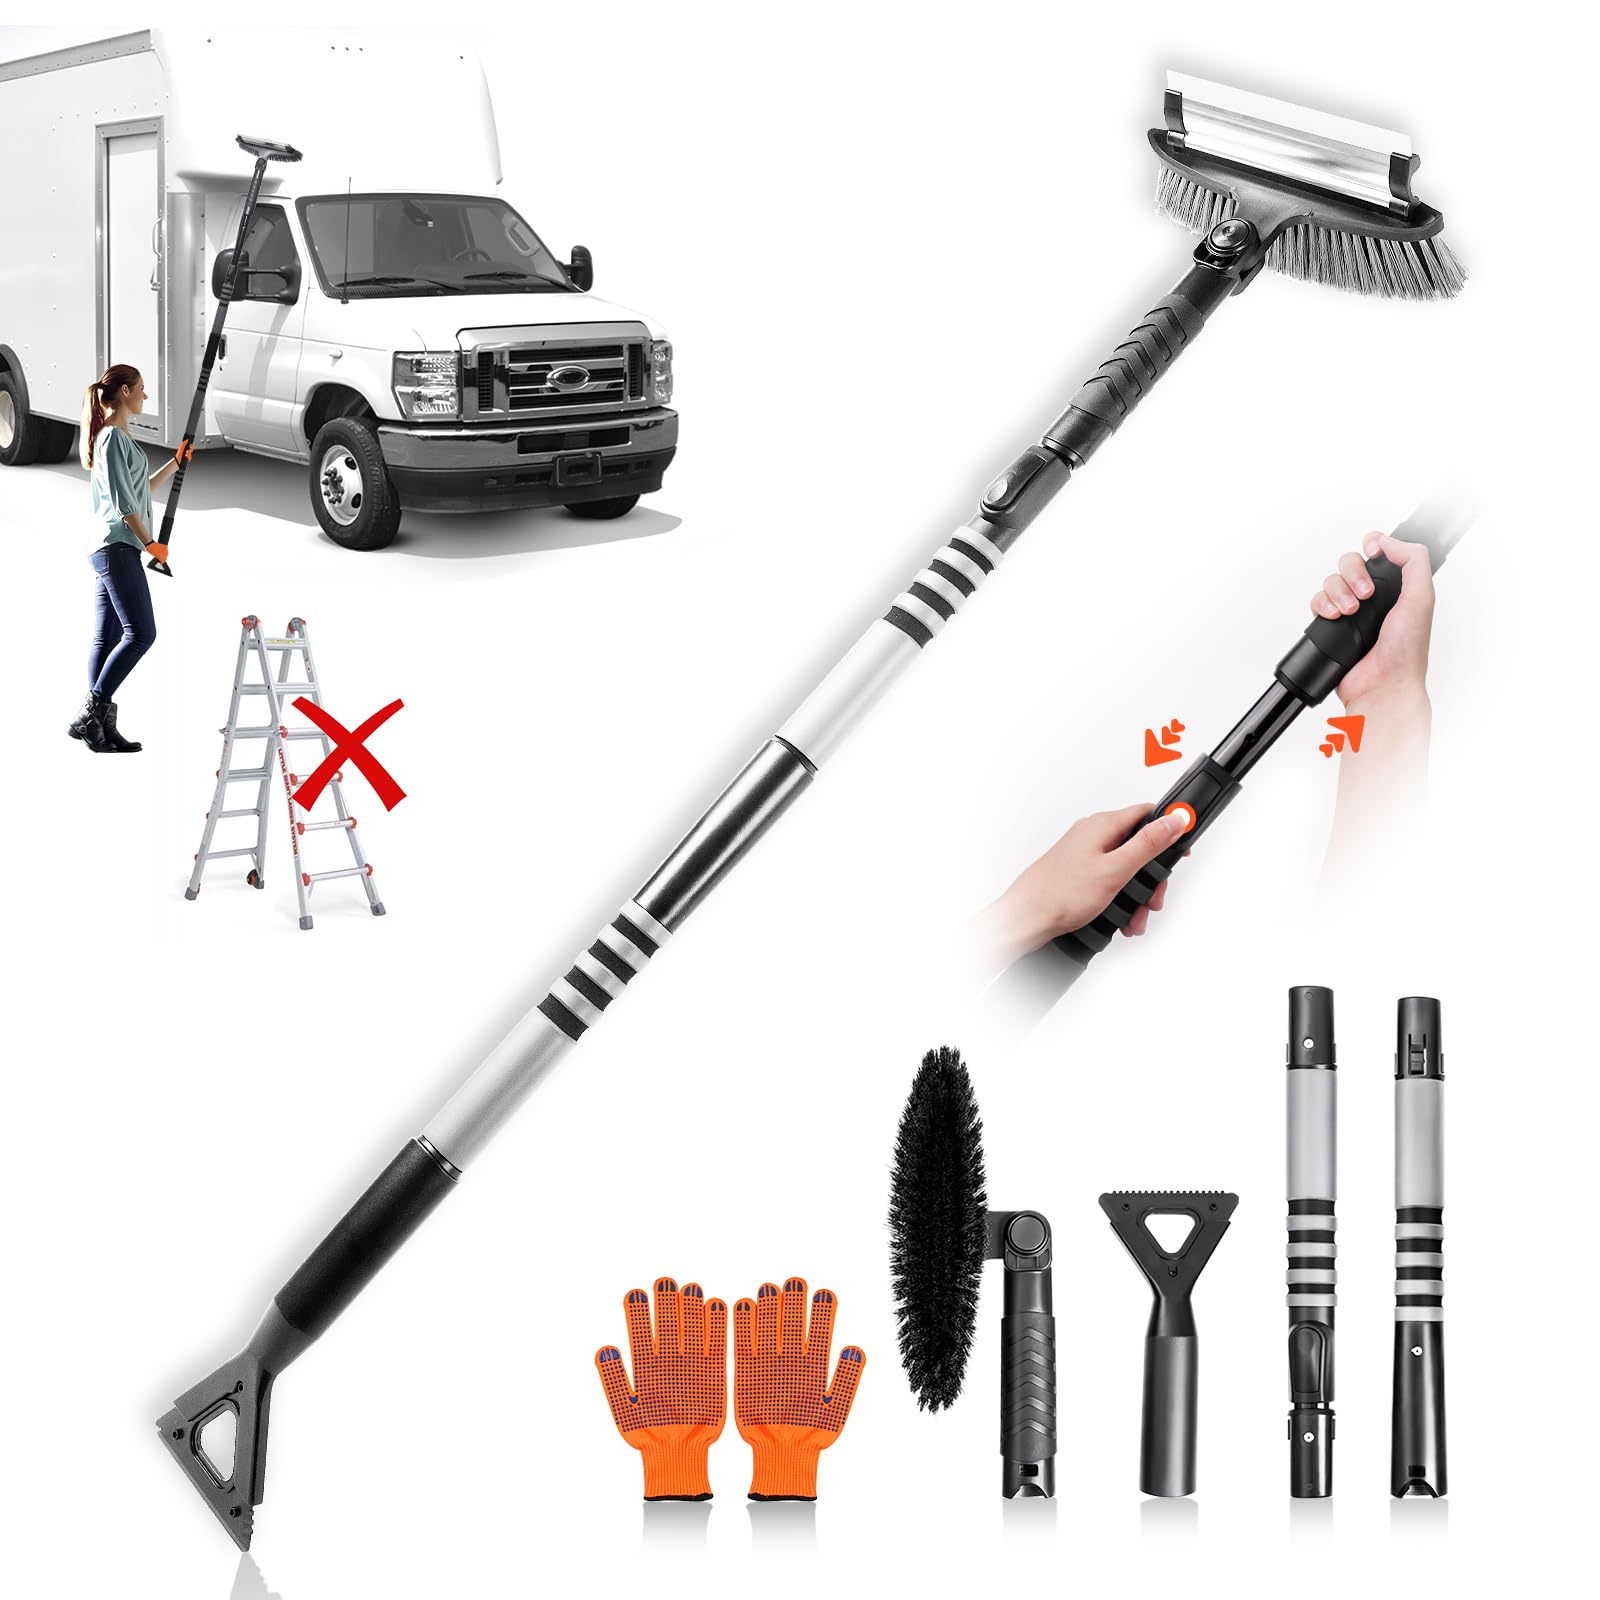 Epltion 72 Extendable Snow Removal for Car, 3 in 1 Ice Scrapers and Snow  Brush with Squeegee for Car Windshield with Foam Grip